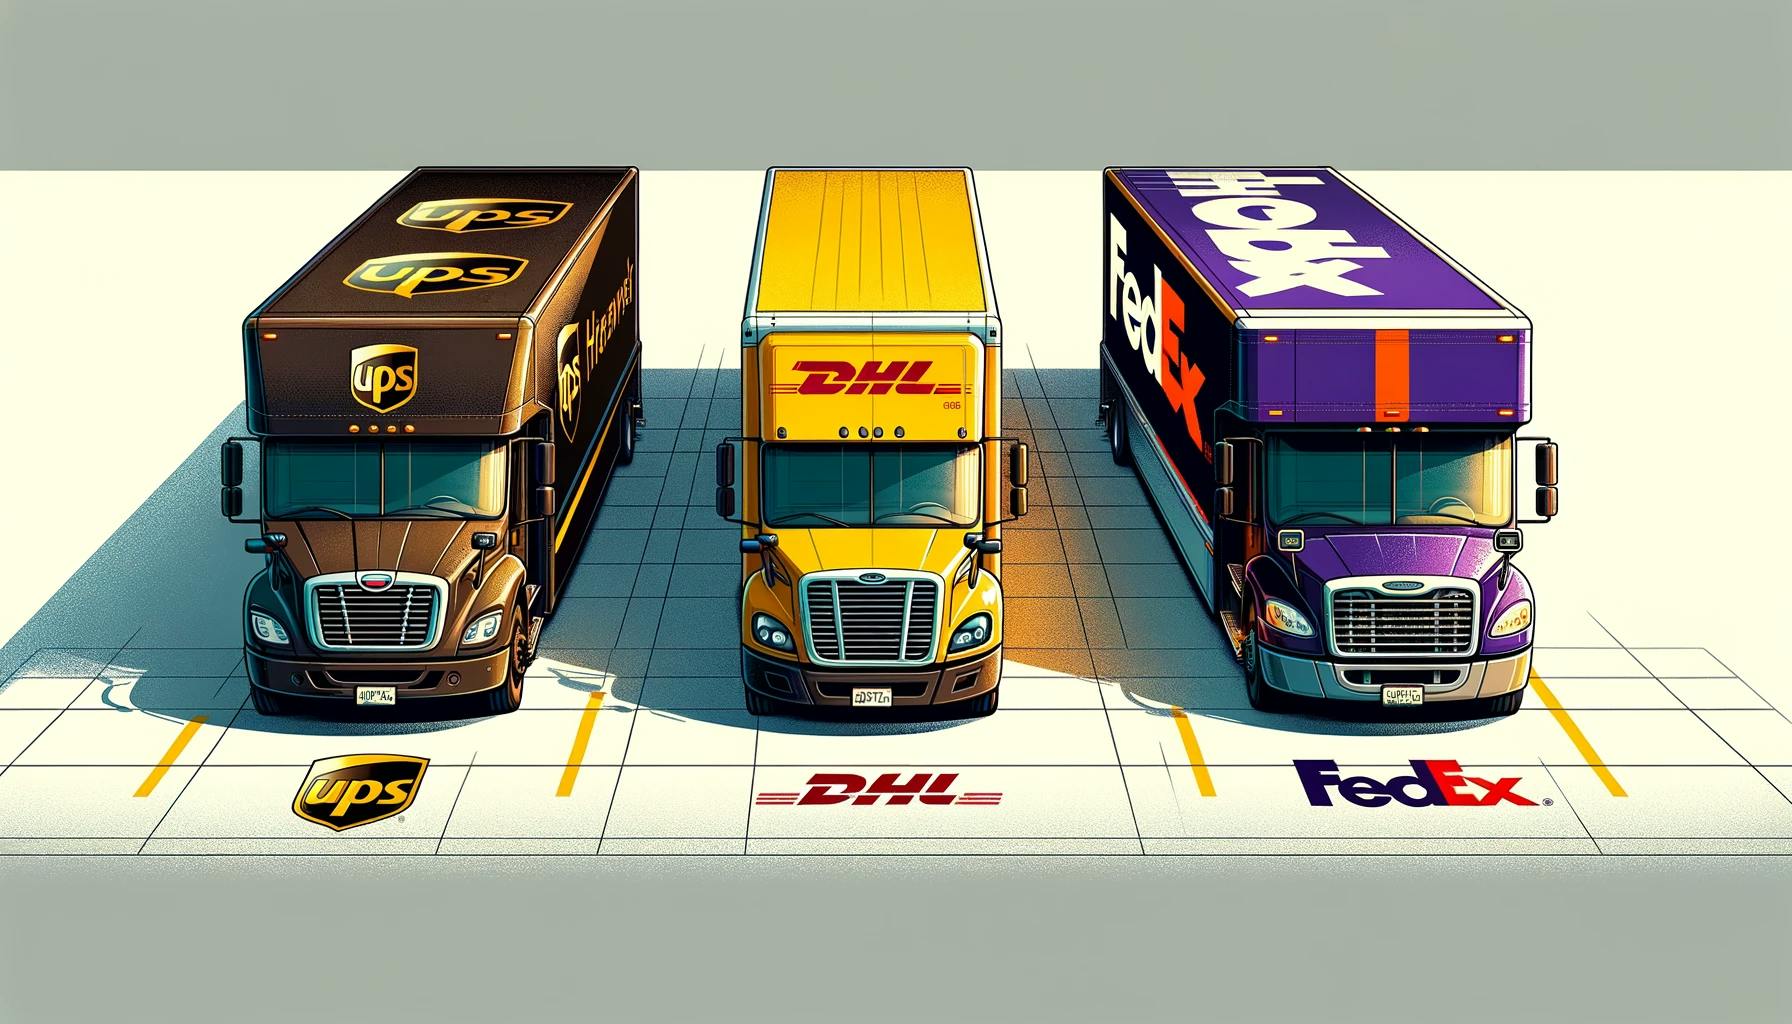 UPS, DHL and FedEx trucks side by side for comparison. 